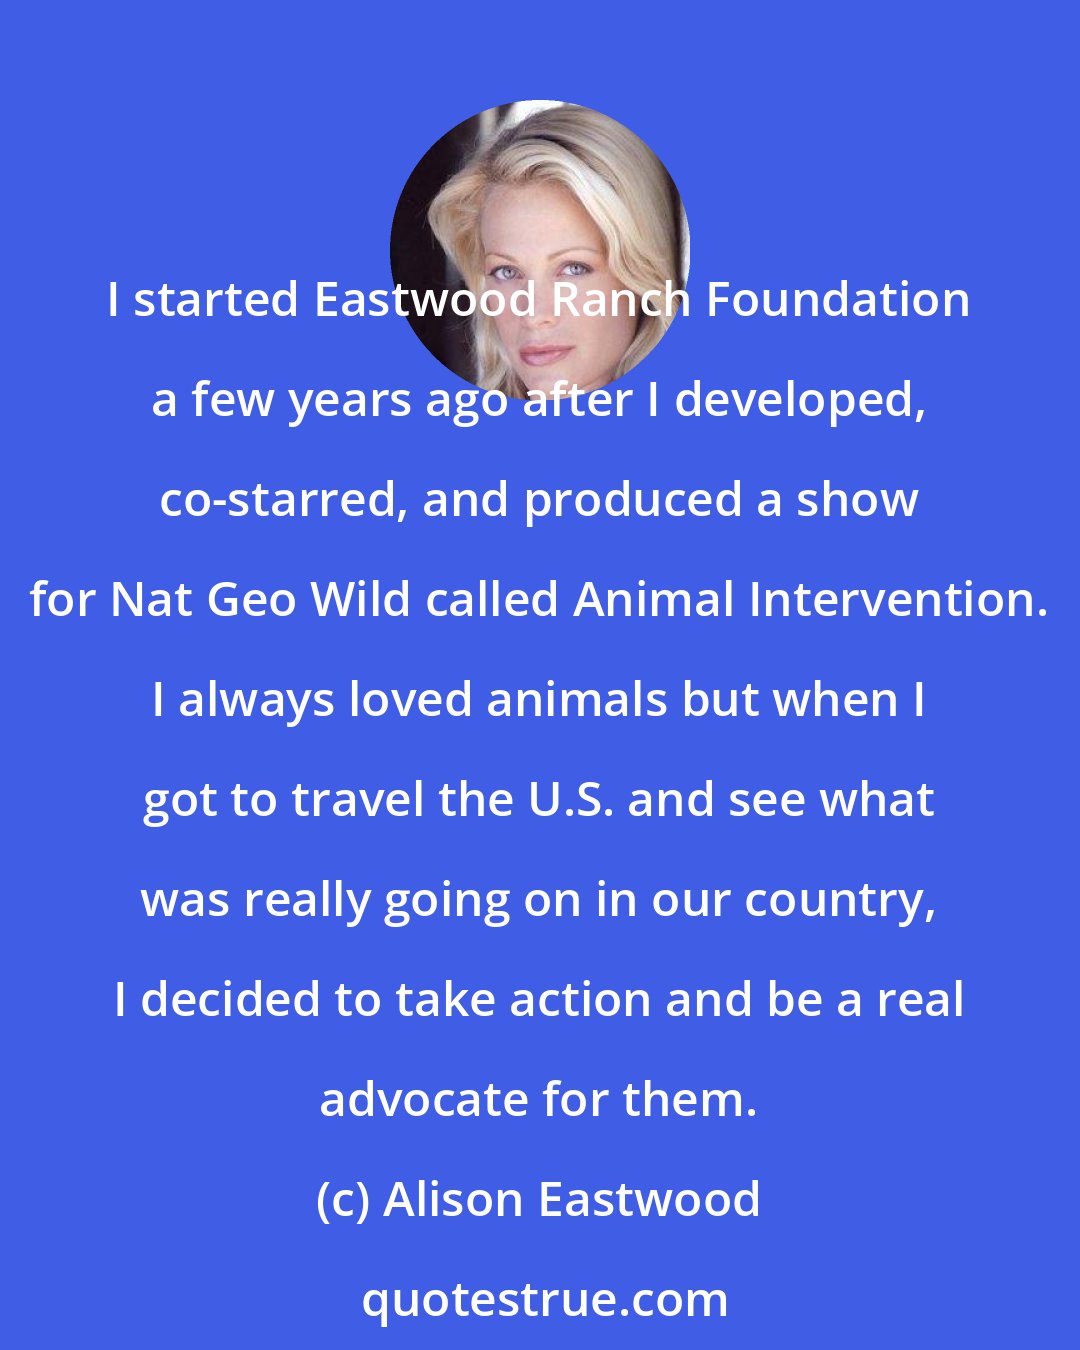 Alison Eastwood: I started Eastwood Ranch Foundation a few years ago after I developed, co-starred, and produced a show for Nat Geo Wild called Animal Intervention. I always loved animals but when I got to travel the U.S. and see what was really going on in our country, I decided to take action and be a real advocate for them.